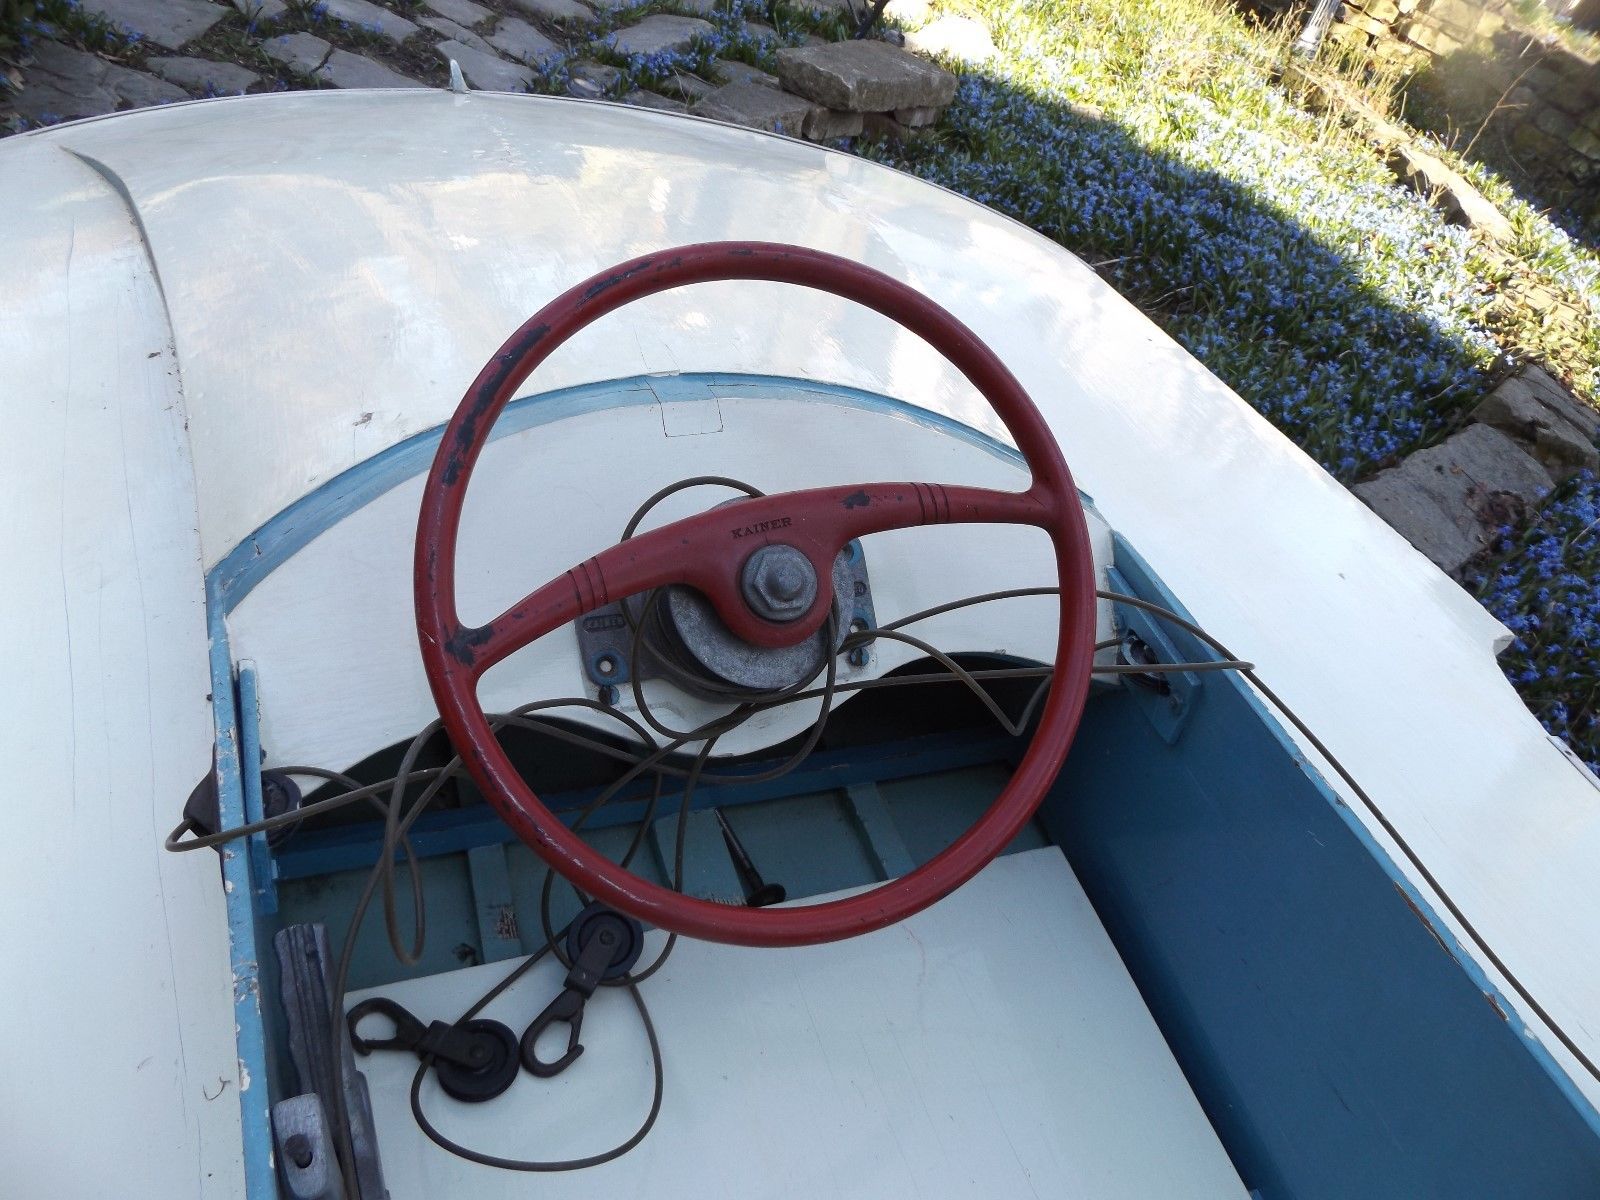 Homemade Hydroplane 1960 for sale for $1,200 - Boats-from 